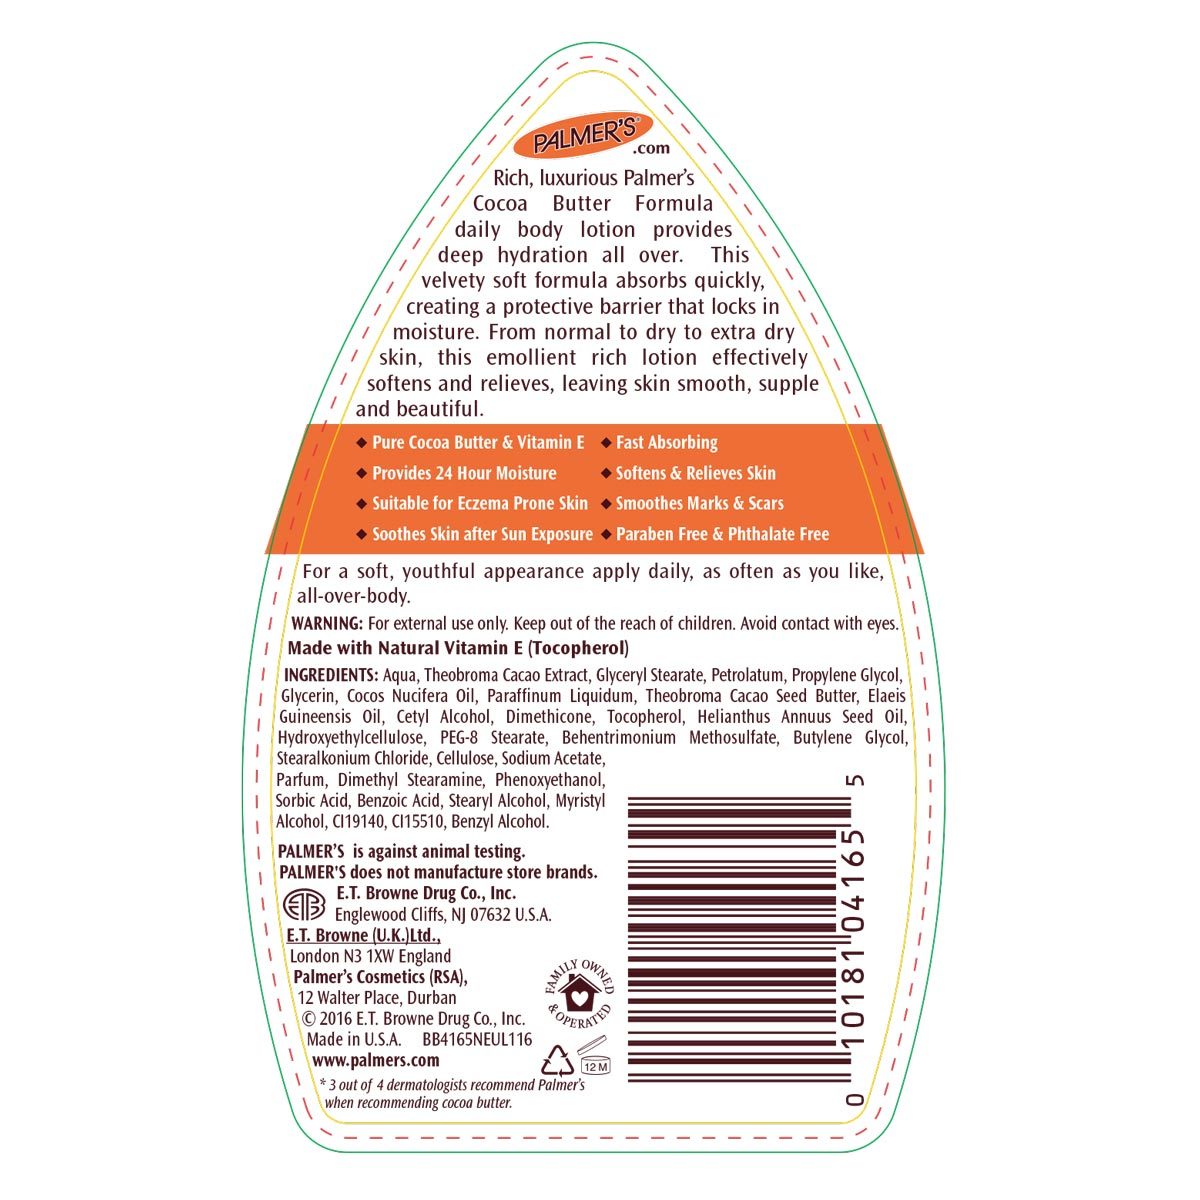 Back of label showing ingredients